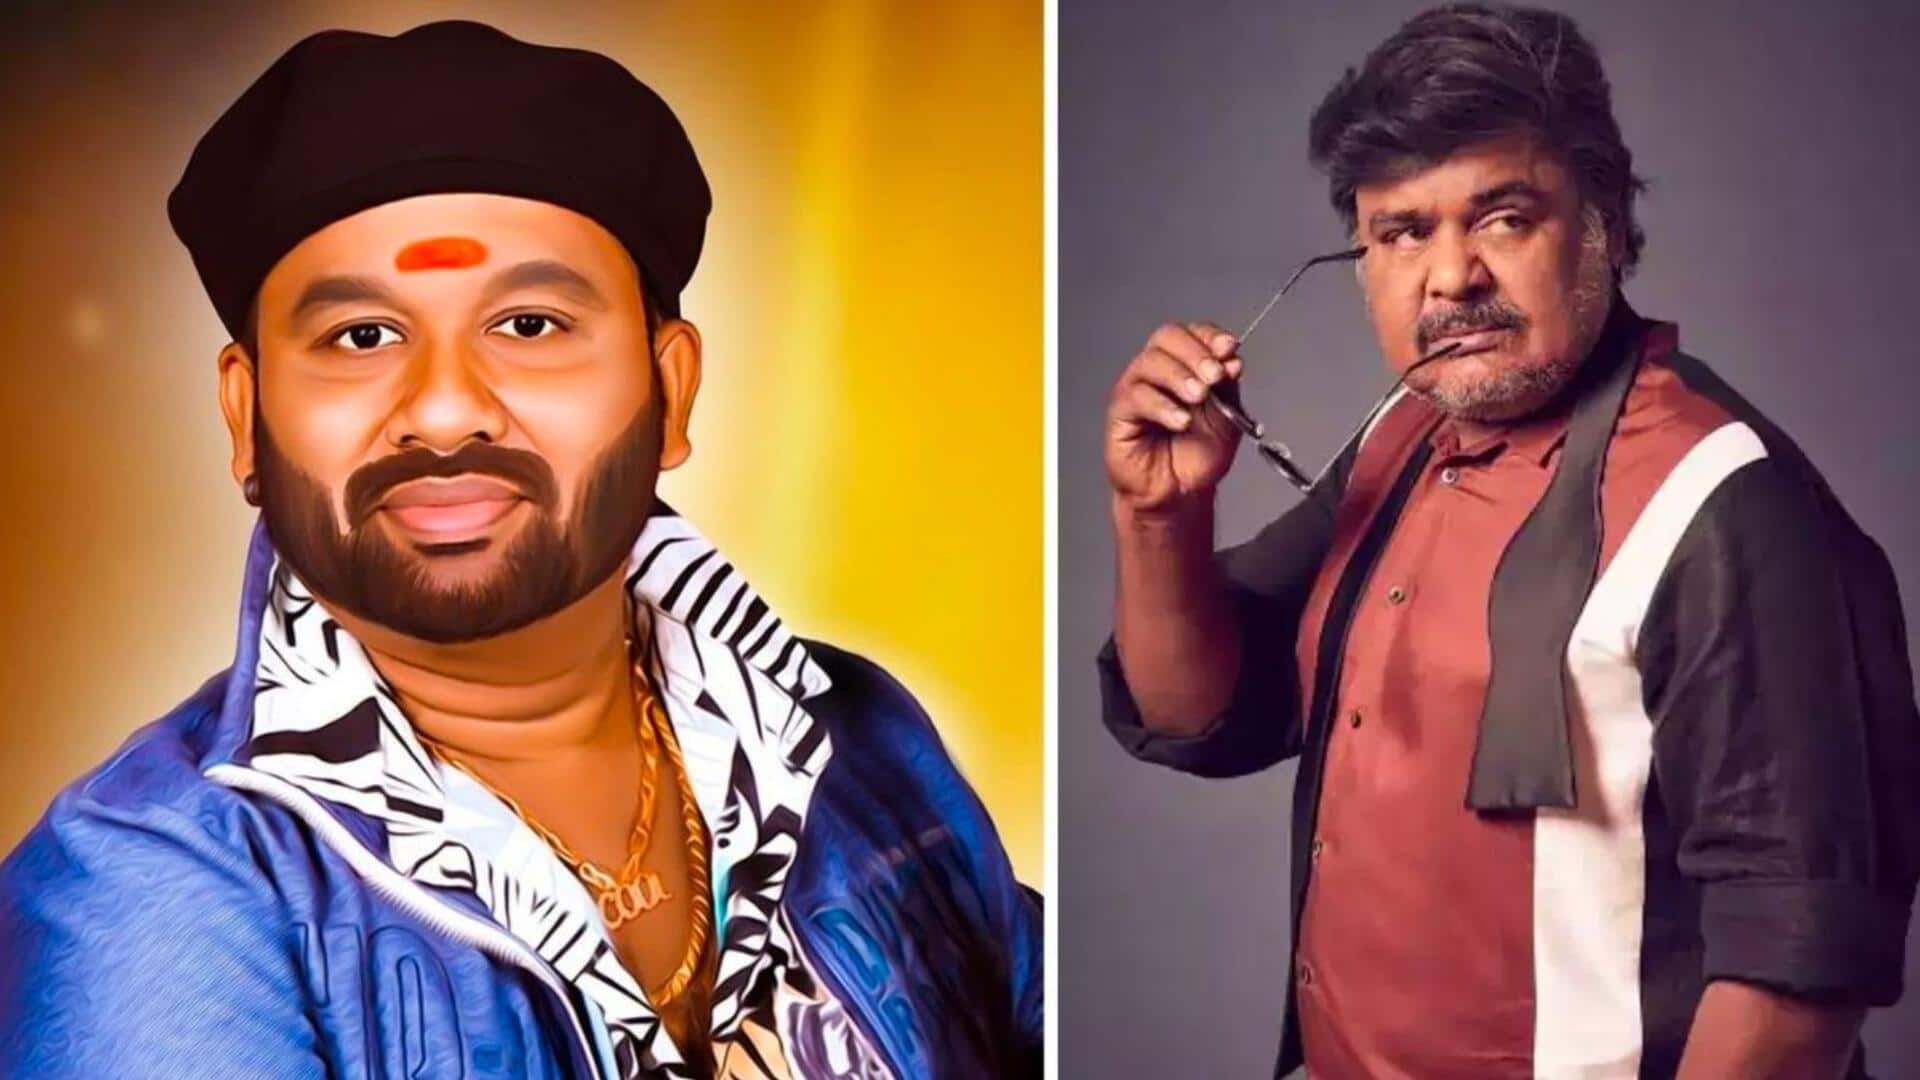 Cool Suresh under fire for forcing garland on female host